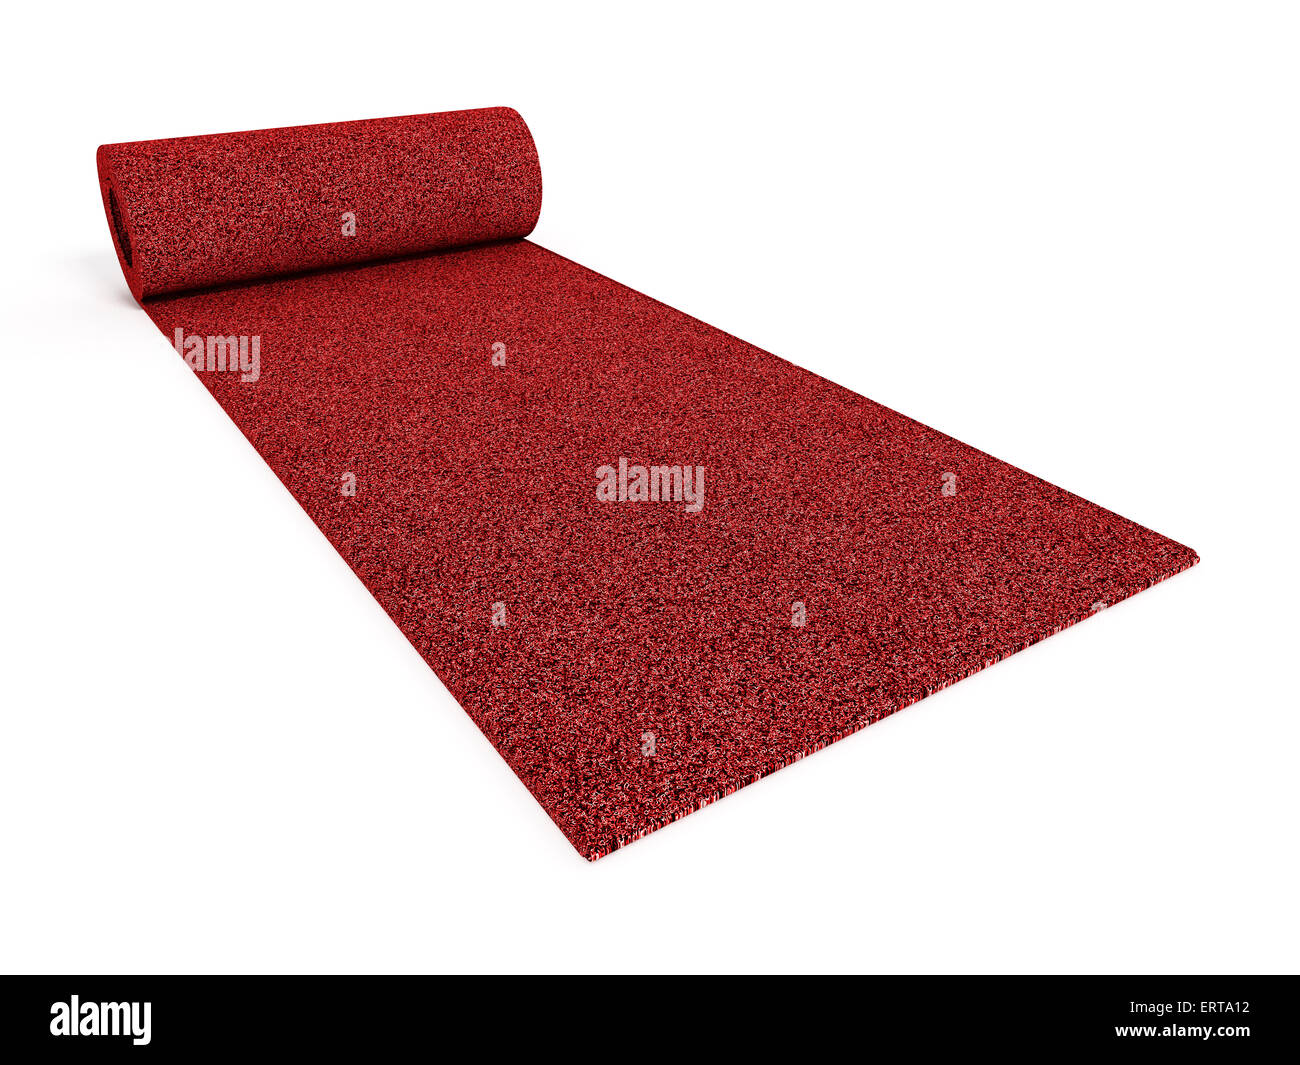 Rolled up red carpet isolated on white background Stock Photo